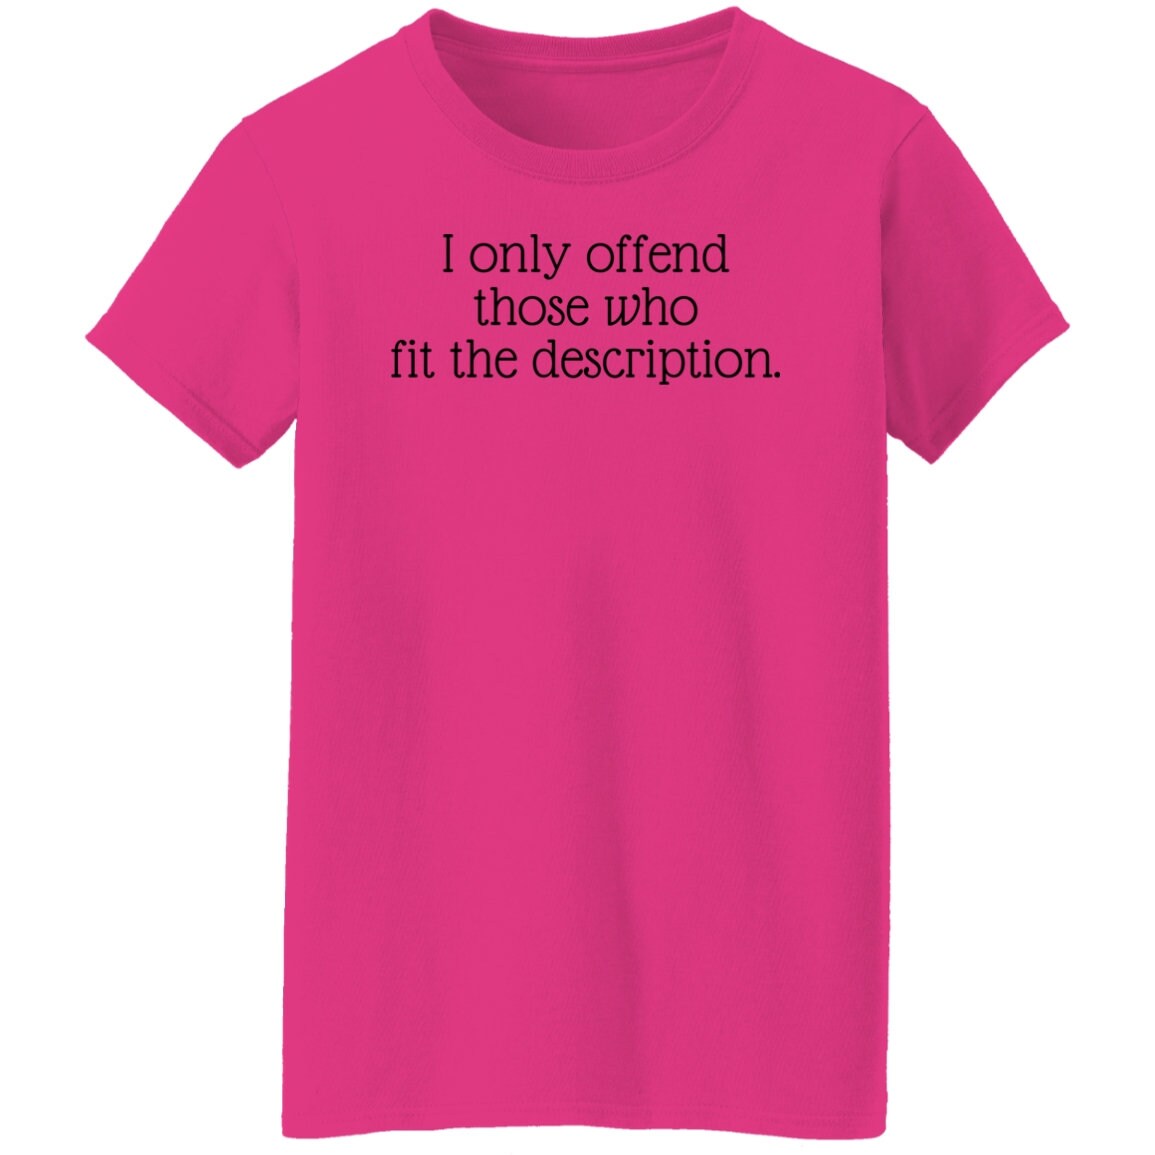 I only offend those who fit the description T-Shirt